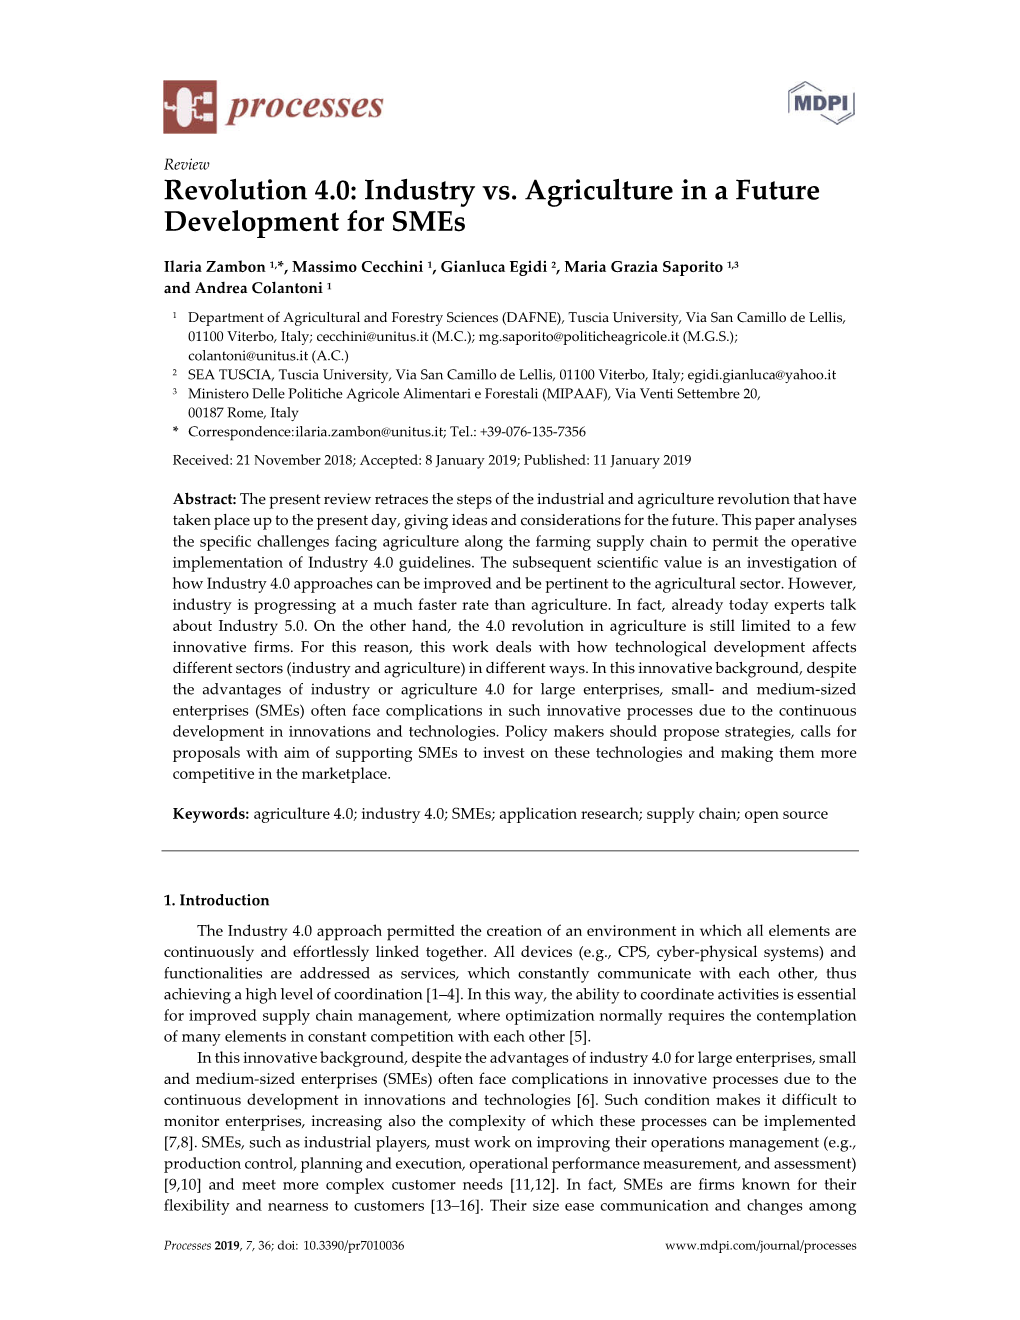 Revolution 4.0: Industry Vs. Agriculture in a Future Development for Smes